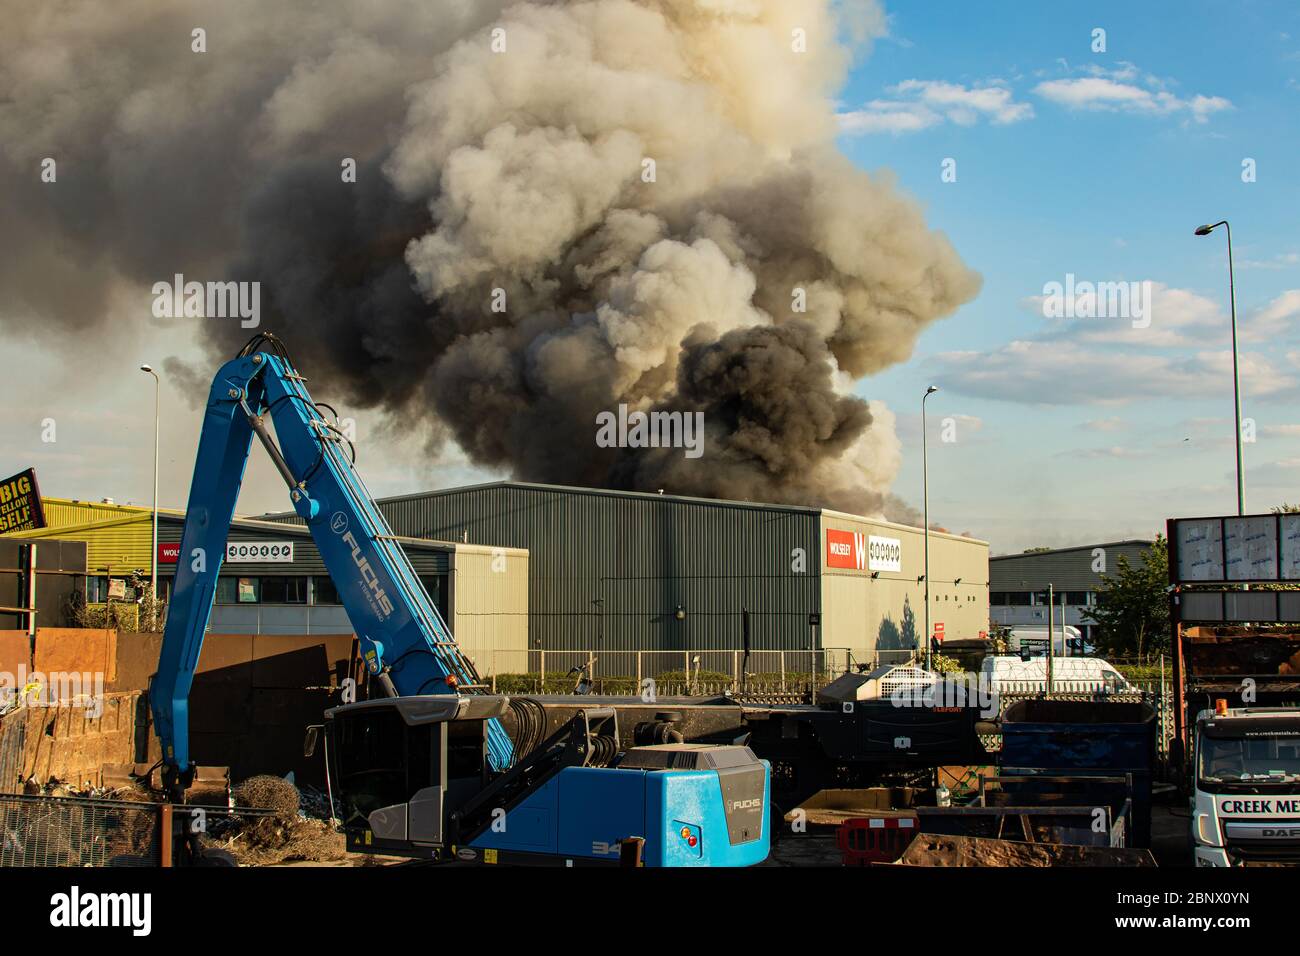 Over 100 Firefighters tackle a blaze at Saimaxx Bulders Merchants on Alfreds Way Barking, London. Friday 16th May 2020. Stock Photo